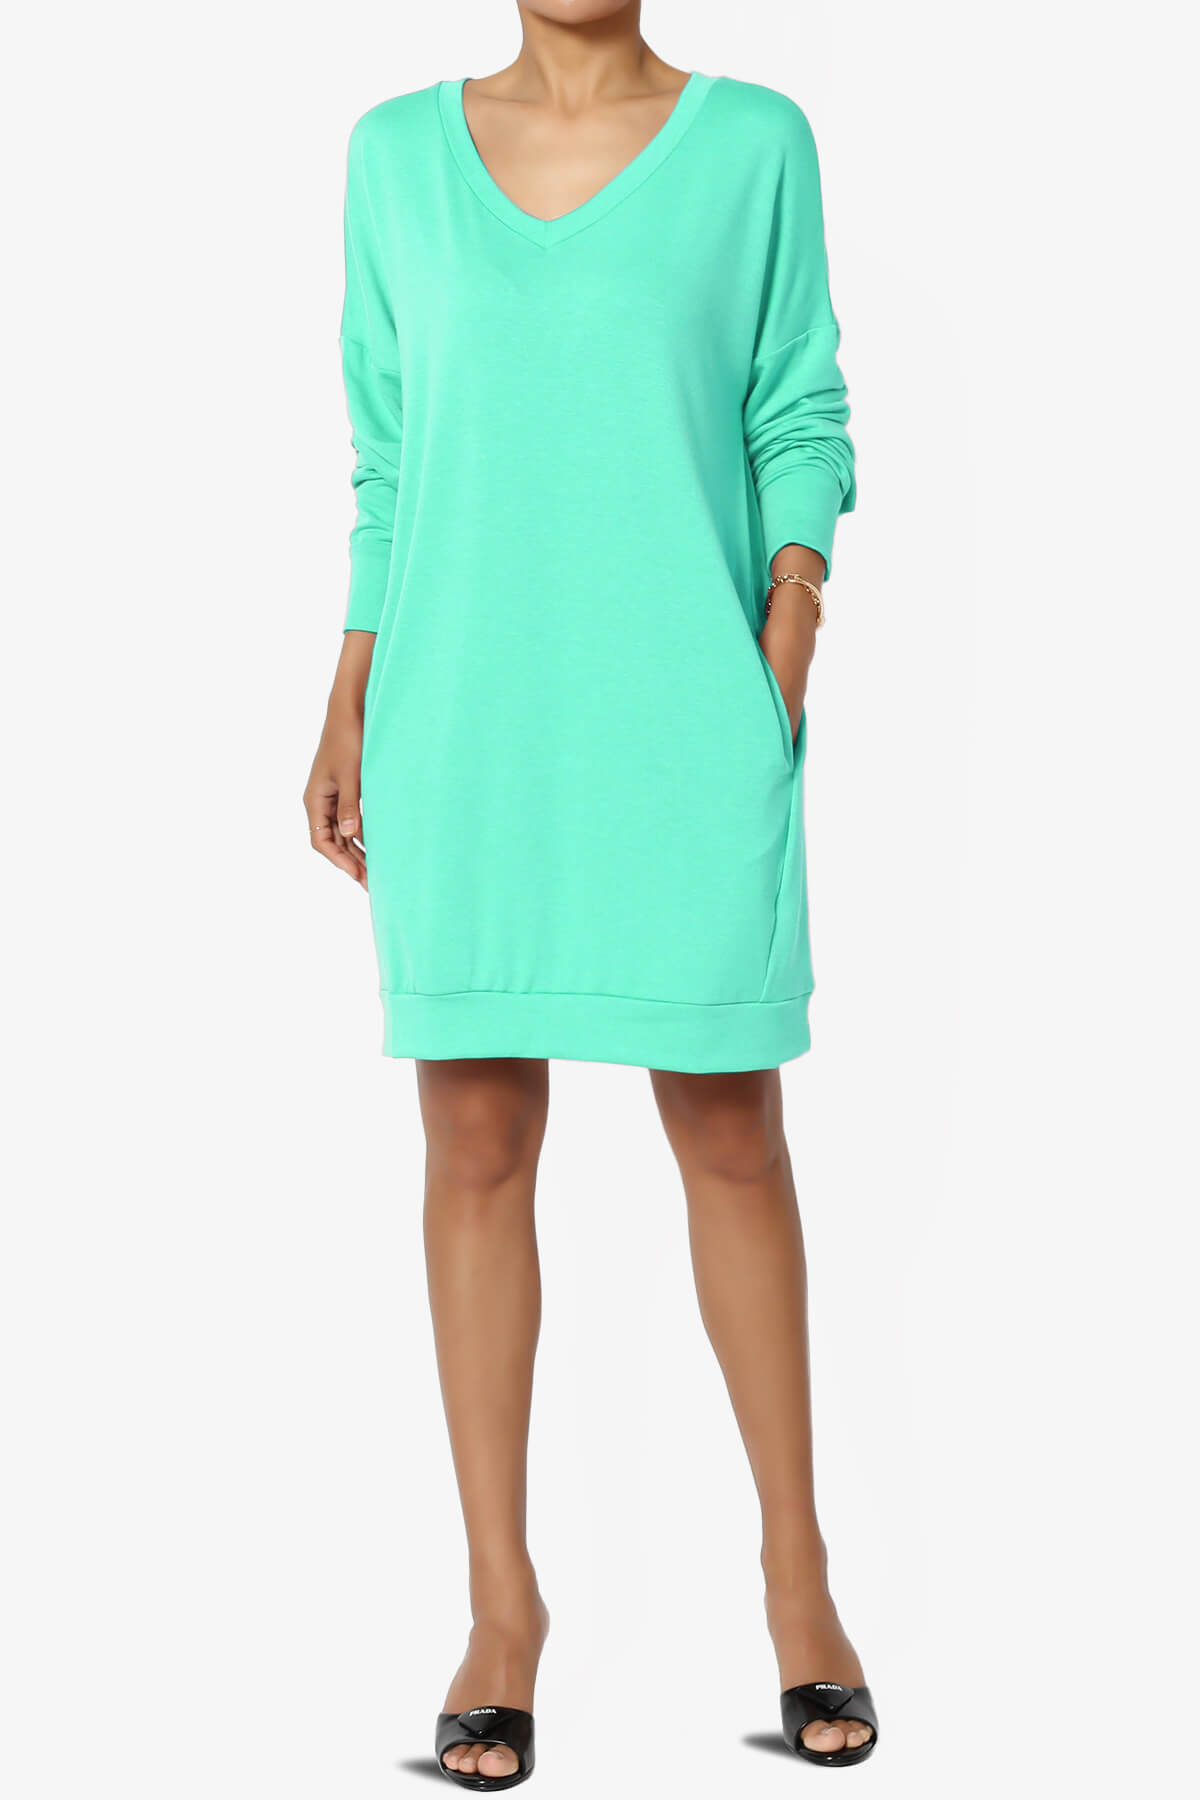 Load image into Gallery viewer, Chrissy V-Neck Pocket Soft Terry Tunic MINT_6
